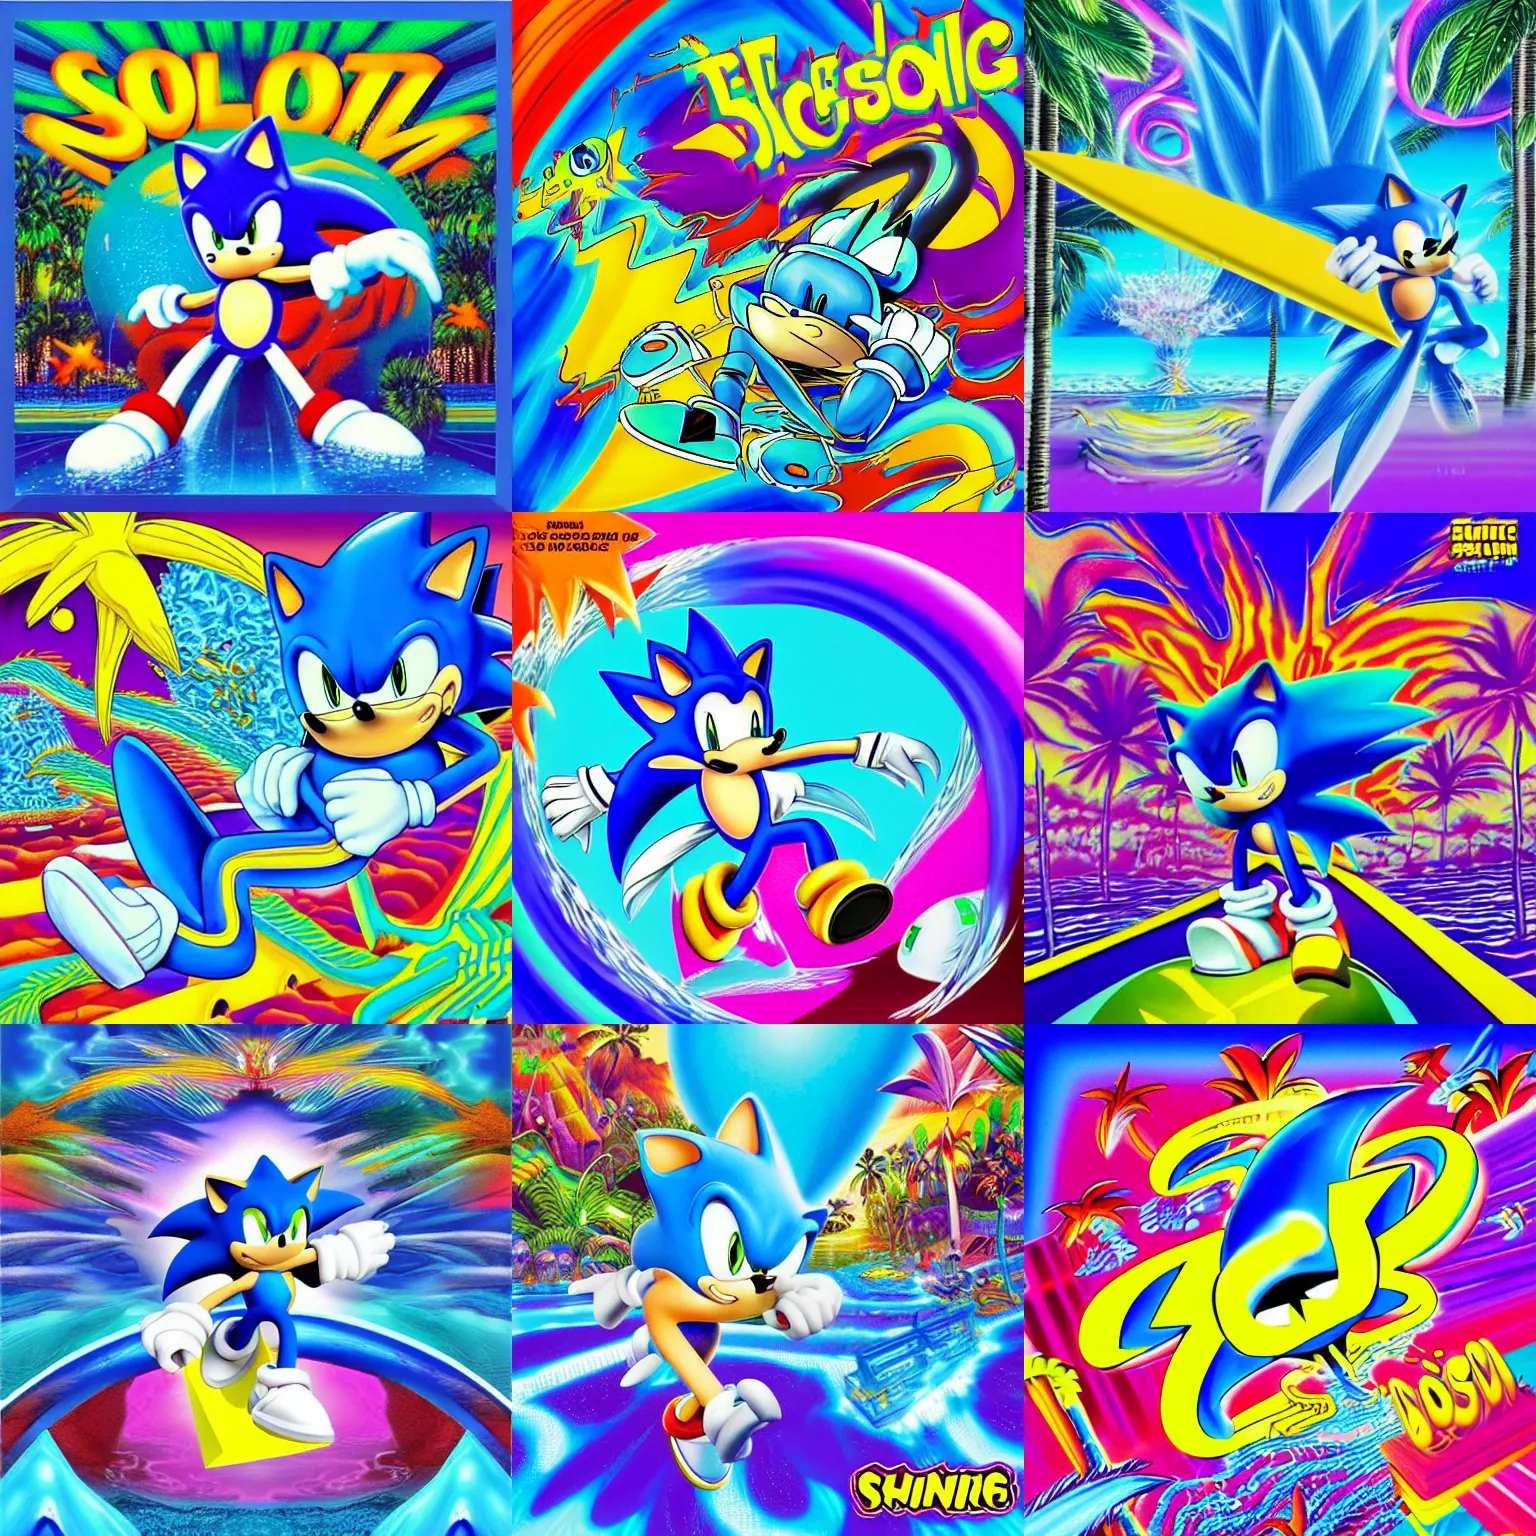 Prompt: surreal, sonic, sharp, detailed professional, high quality airbrush art MGMT album cover of a liquid dissolving LSD DMT blue sonic the hedgehog surfing through cyberspace, tropical ocean, purple checkerboard background, 1980s 1985 arcade video game album cover